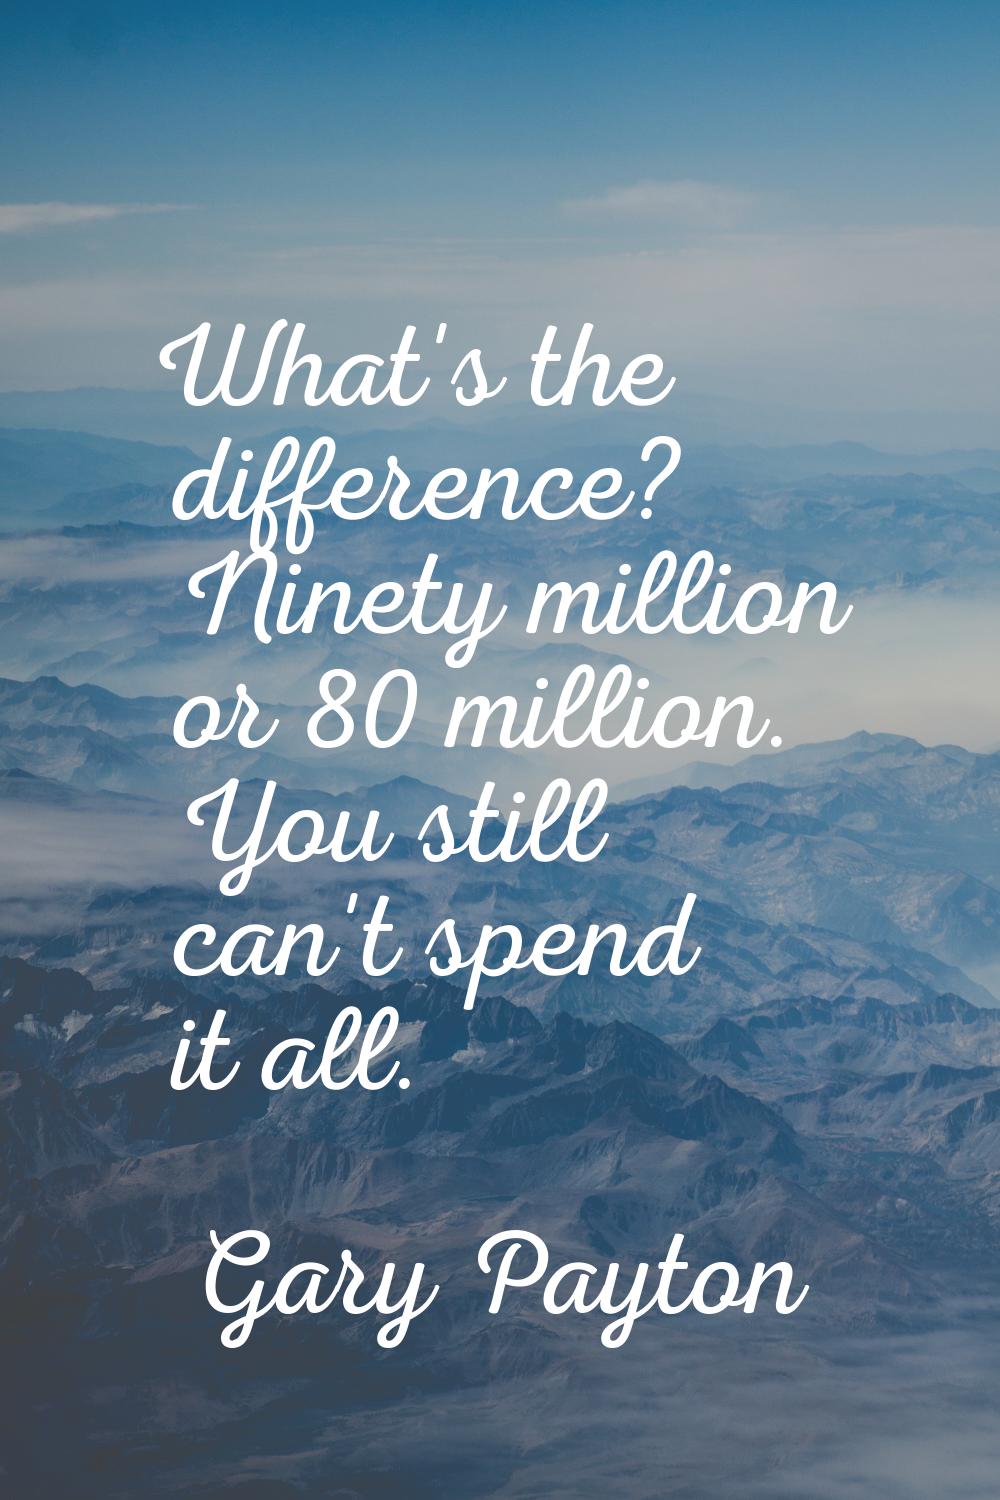 What's the difference? Ninety million or 80 million. You still can't spend it all.